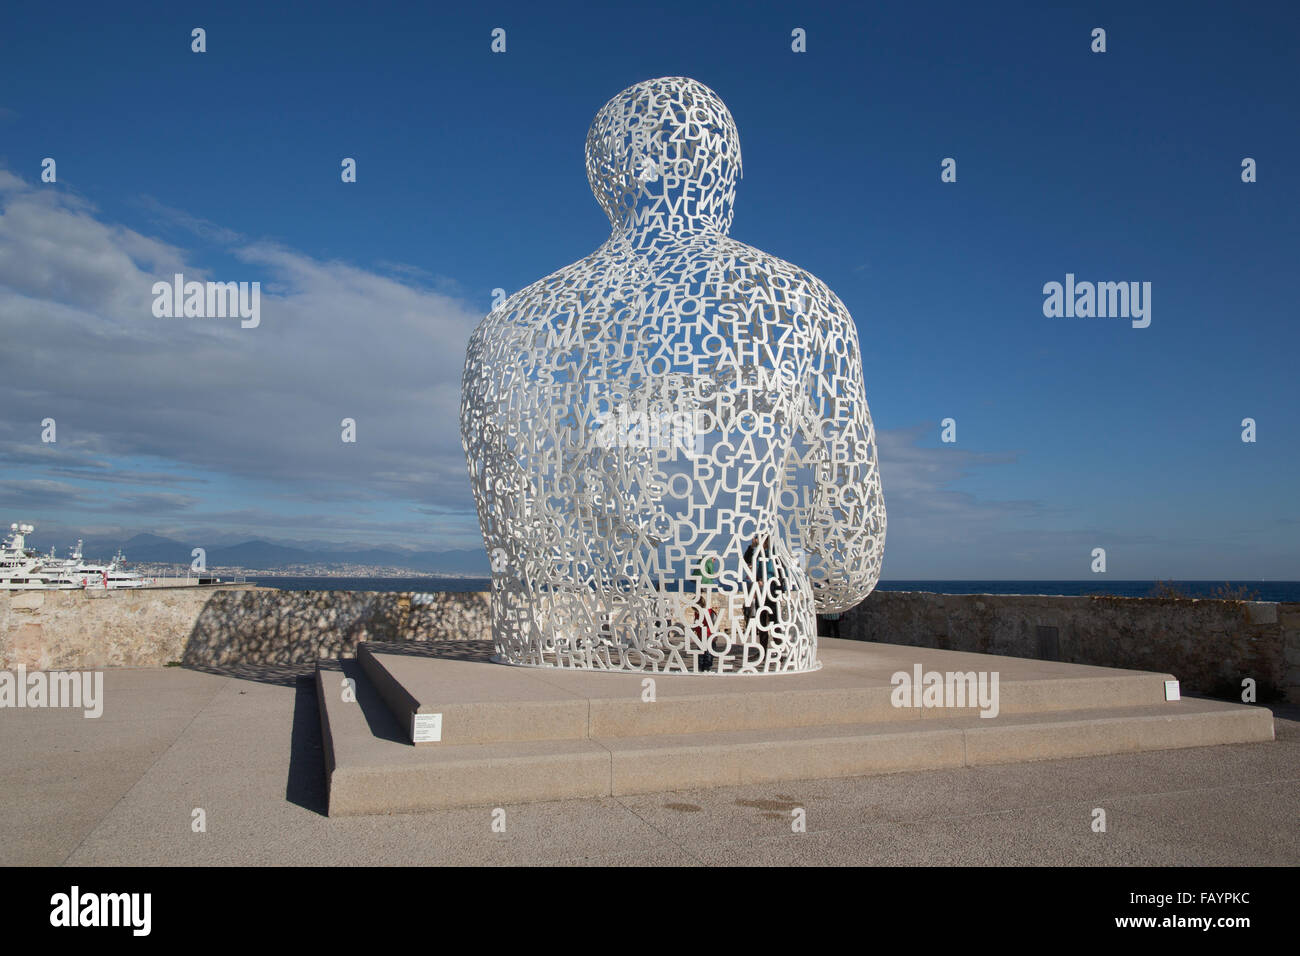 La Grande Nomade d'Antibes by Jaume Plensa, Antibes, Côte d’Azur, French Riviera, located between Nice and Cannes, France Stock Photo